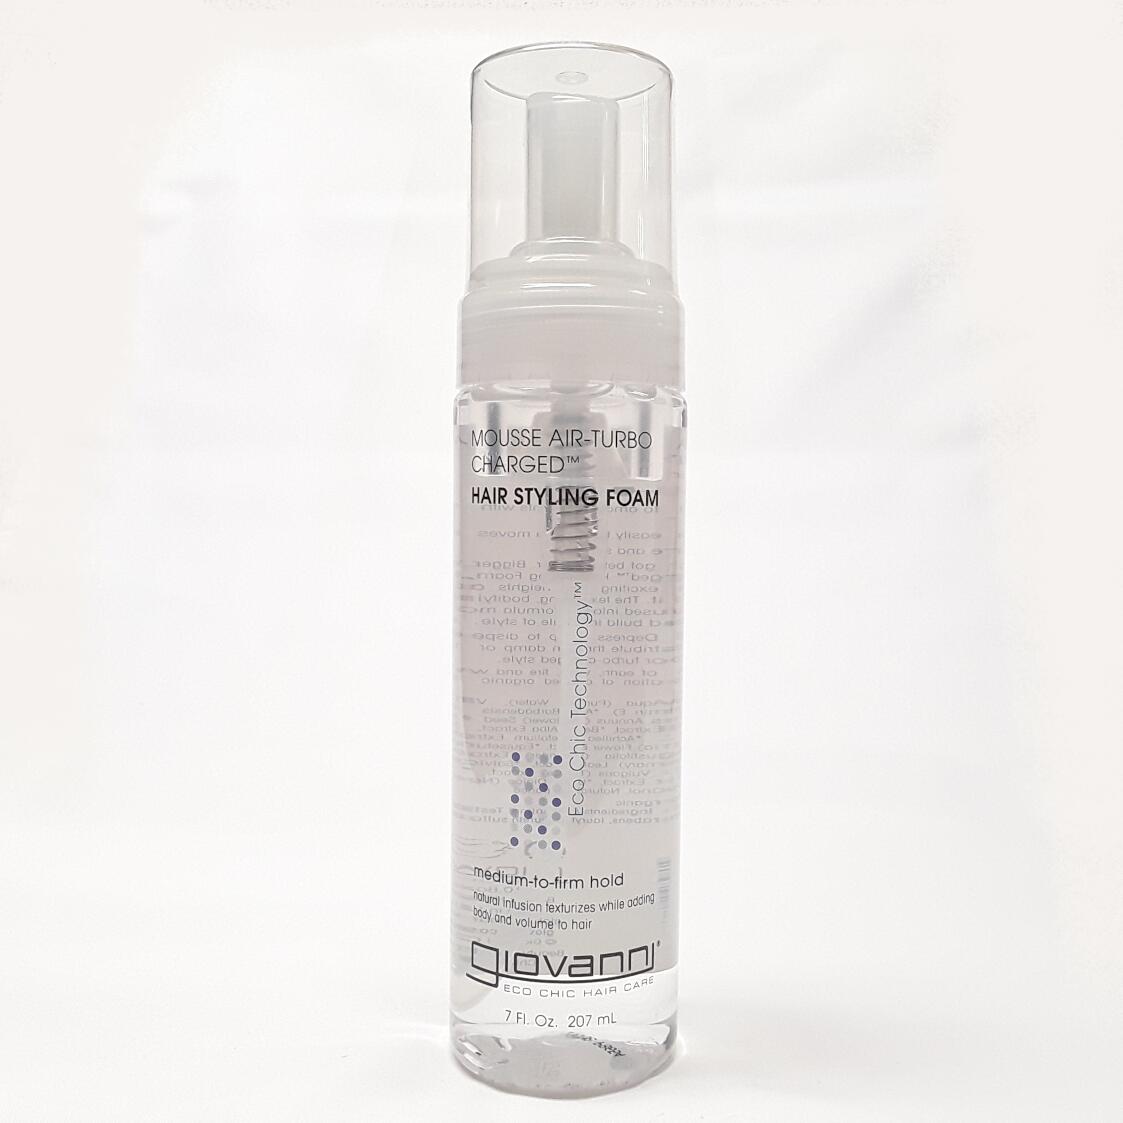 Giovanni Mousse Air Turbo Charged Hair Styling Foam Website Product Image View